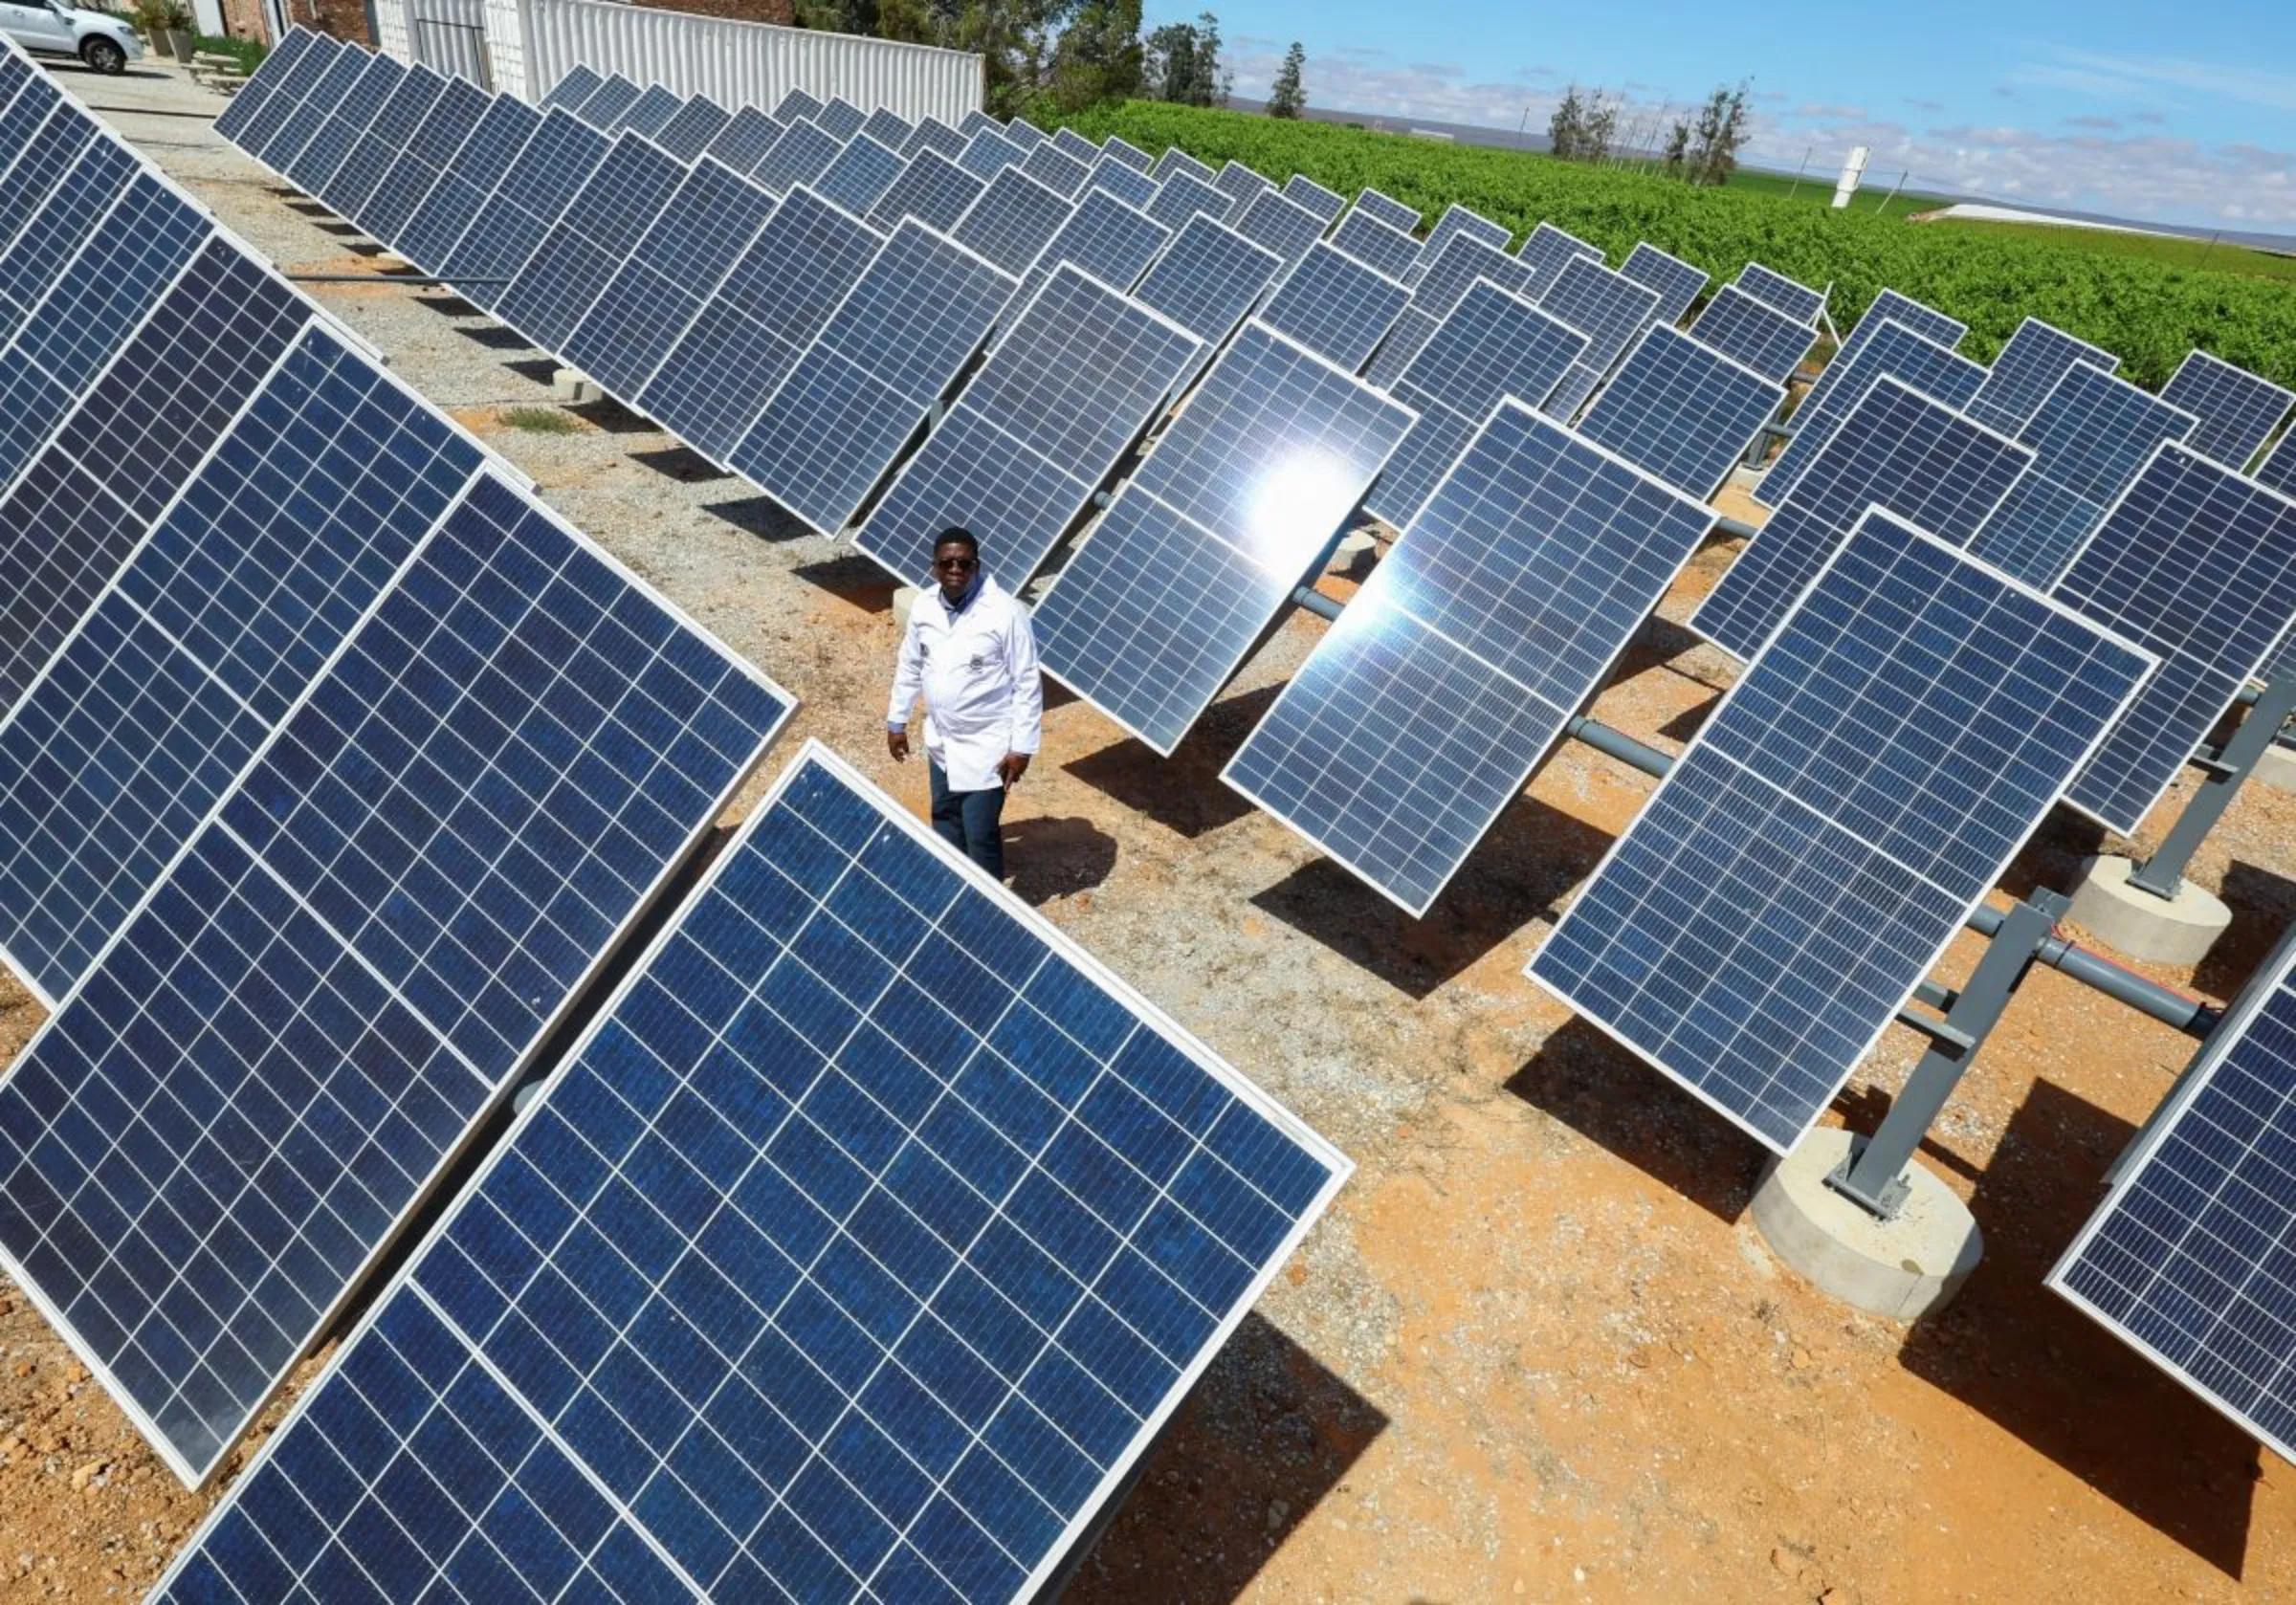 solar panels in africa - What is the potential for solar energy in Africa